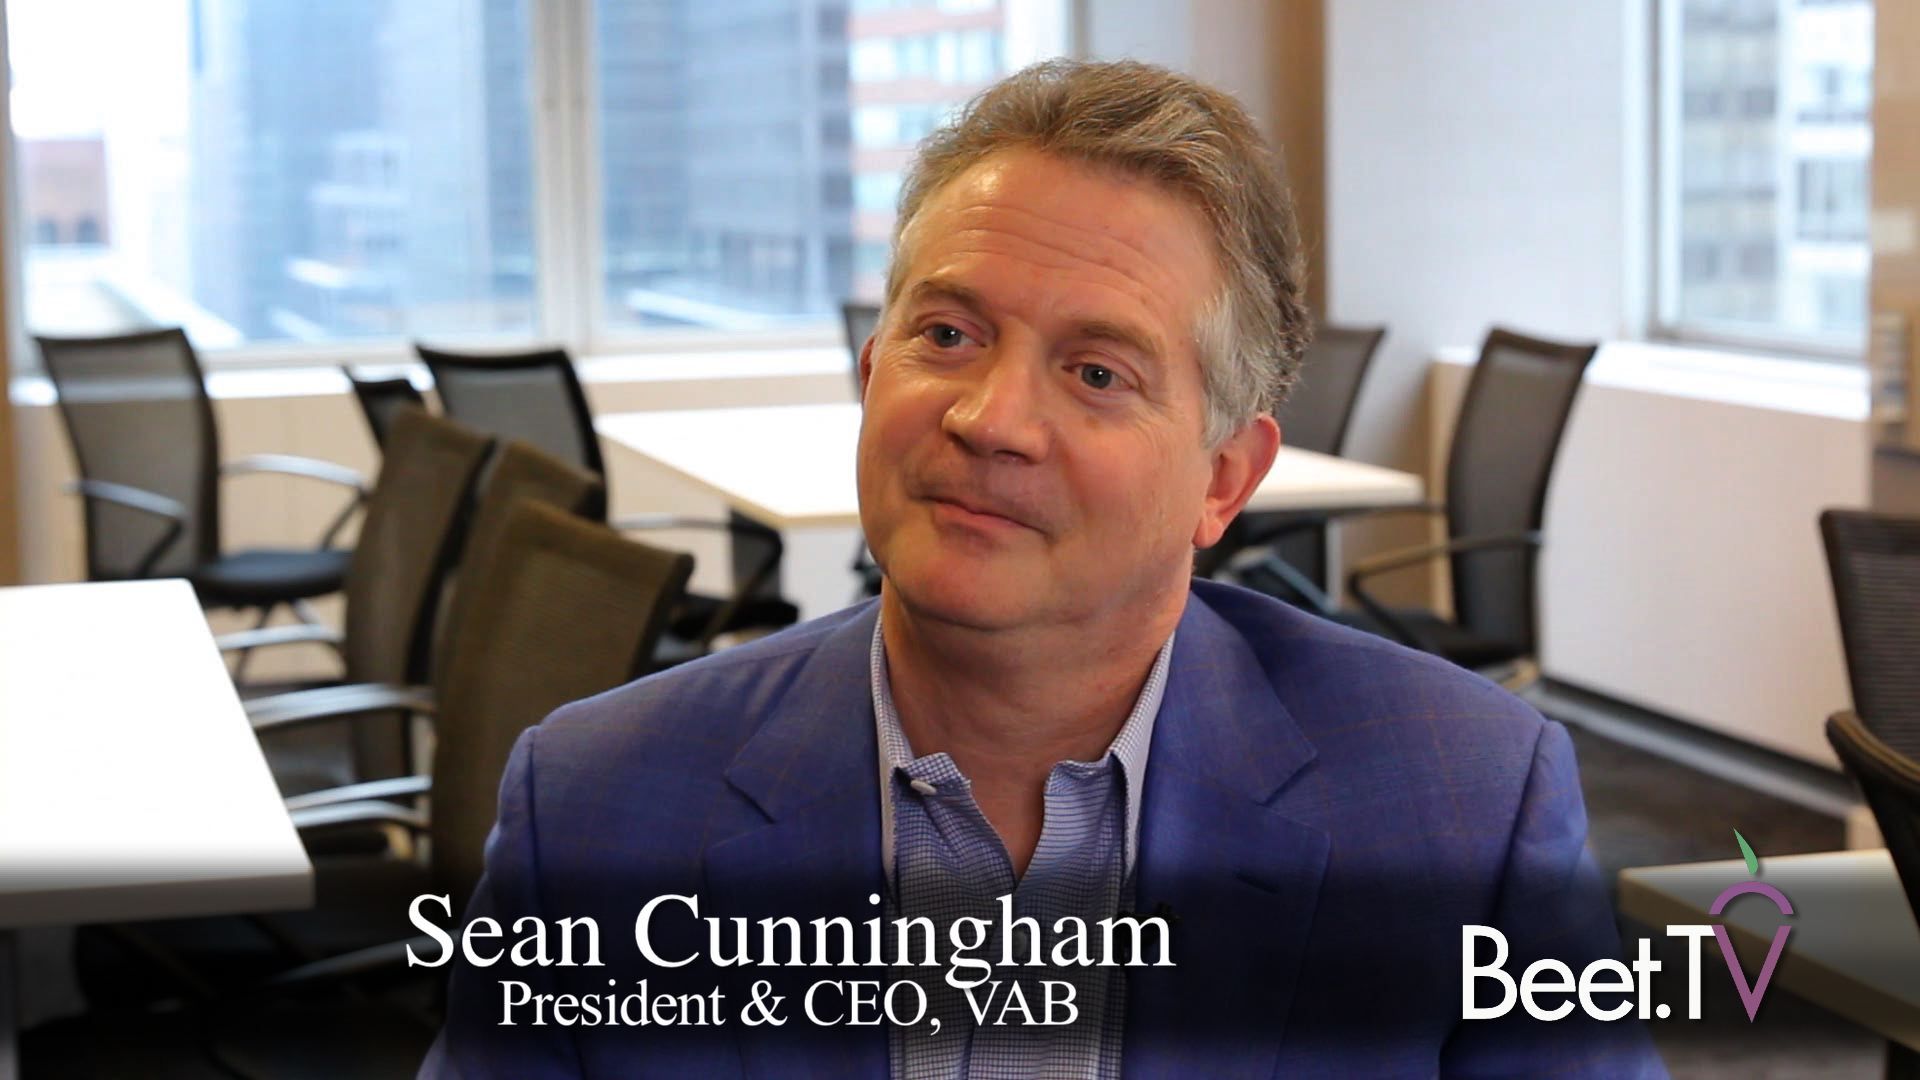 VAB Projects $2.1 Billion In 2019 Addressable TV Spend: ‘It’s Mature’ Says CEO Cunningham